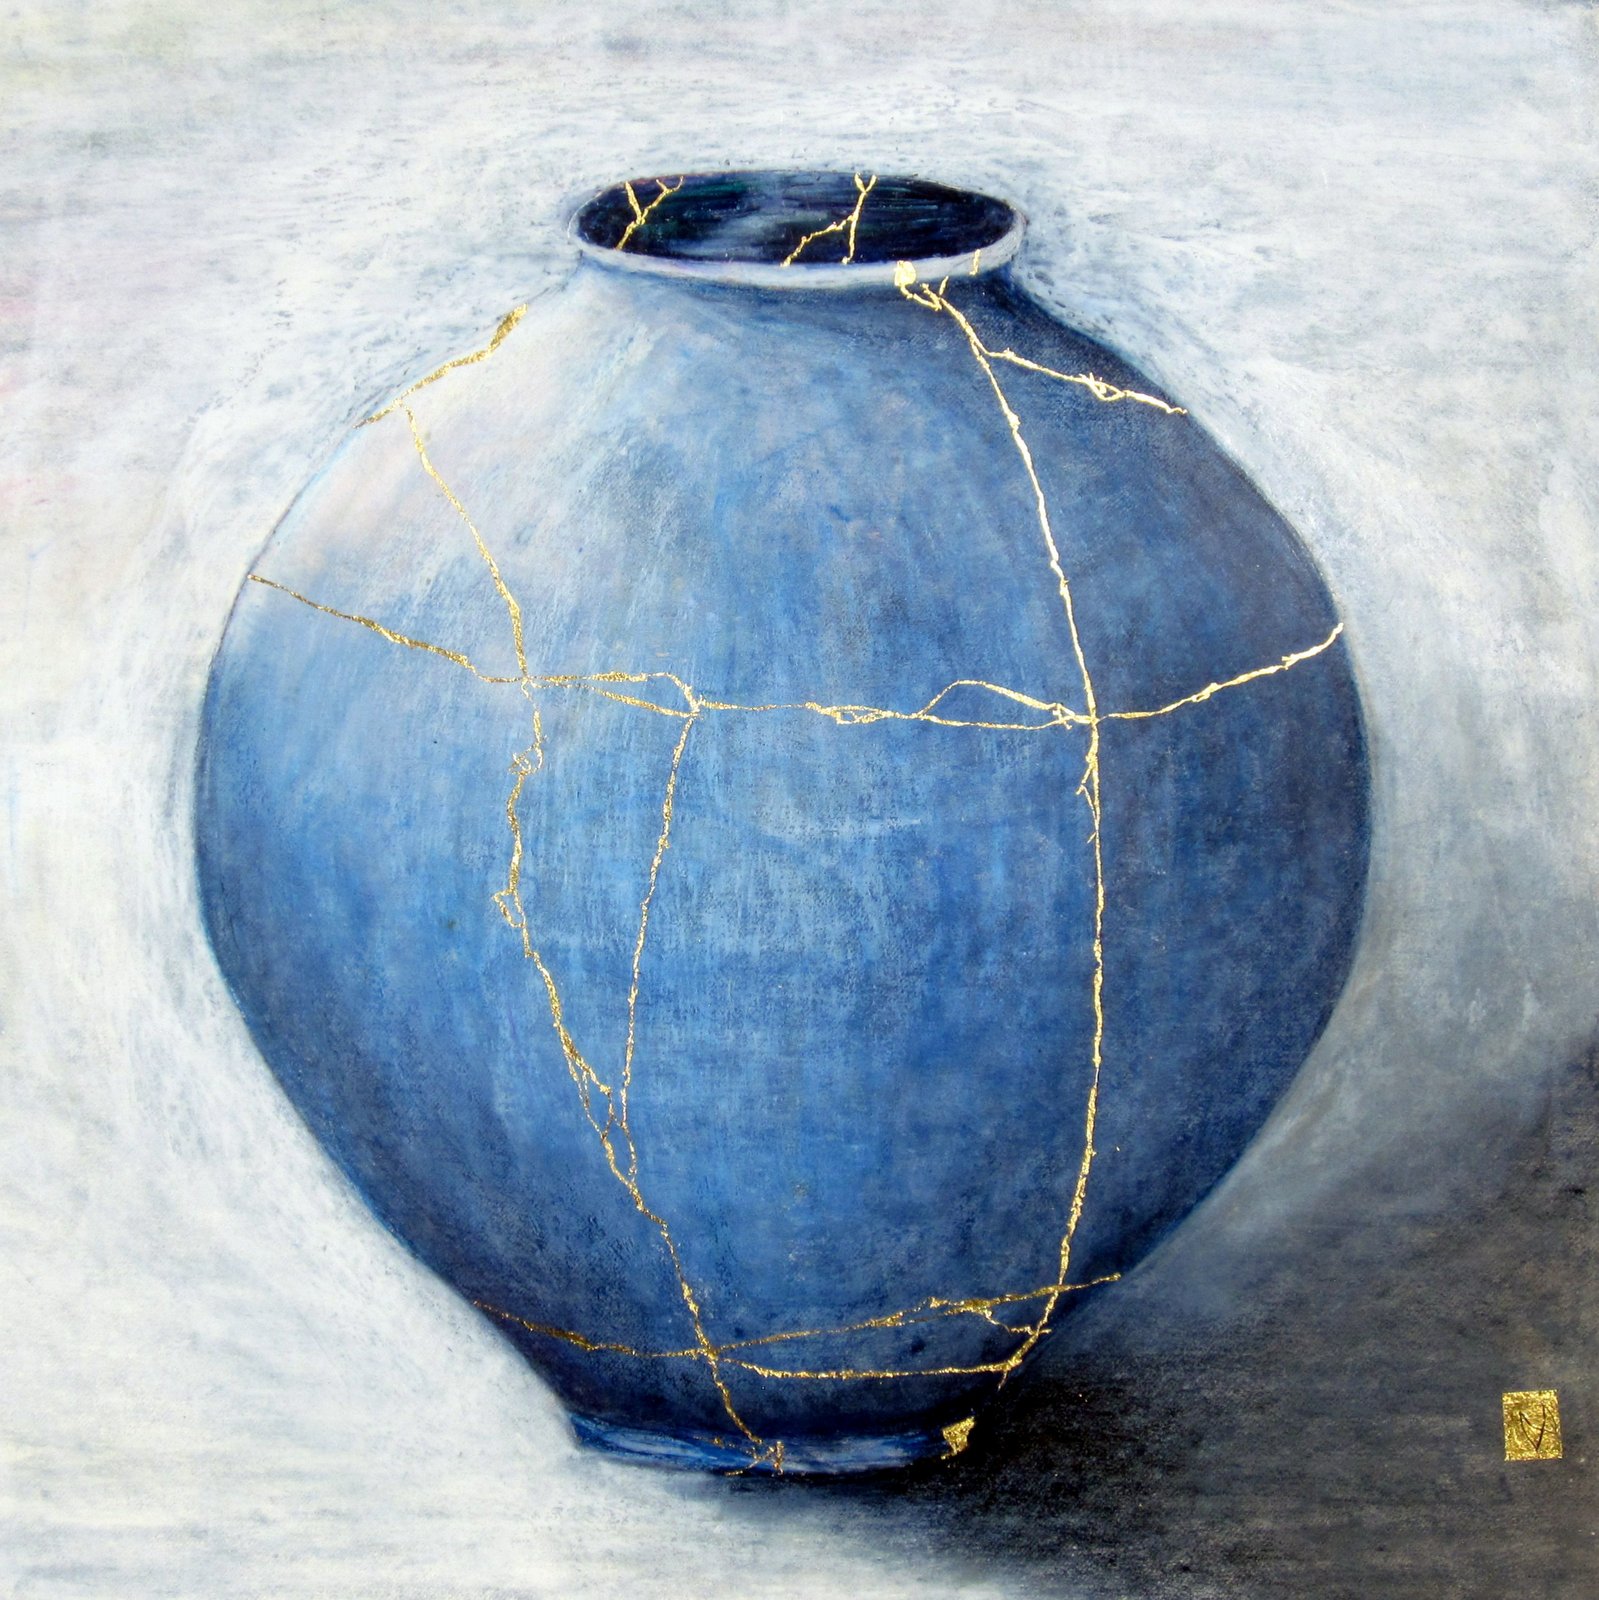 Contemporary large kintsugi vessel with gold repair – light and dark blues on grey